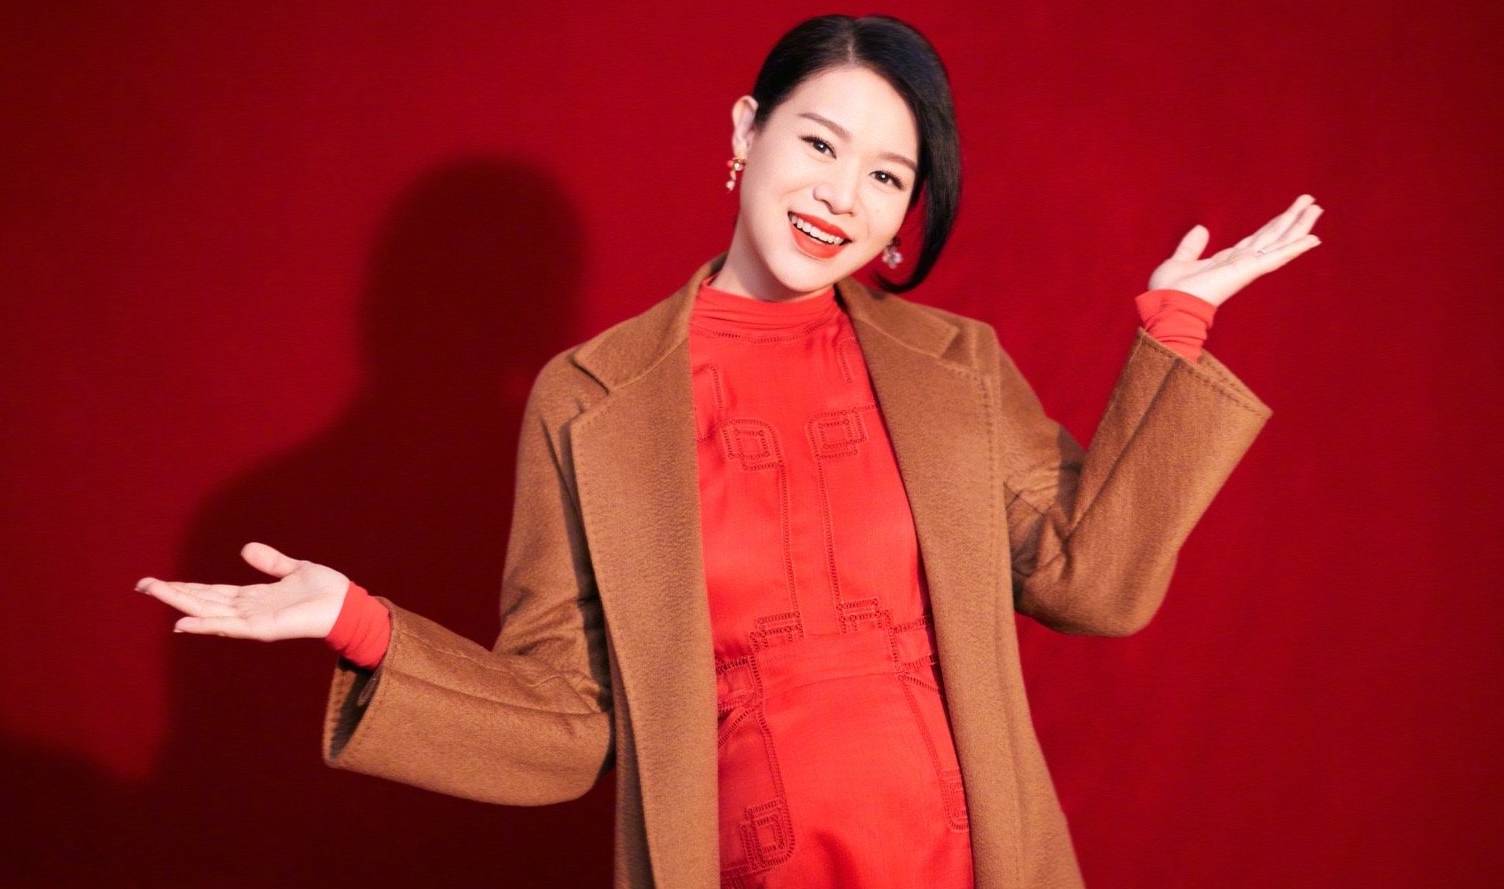 Myolie Wu Reportedly Earned S$617,000 From Just 3 Months Of Working In China